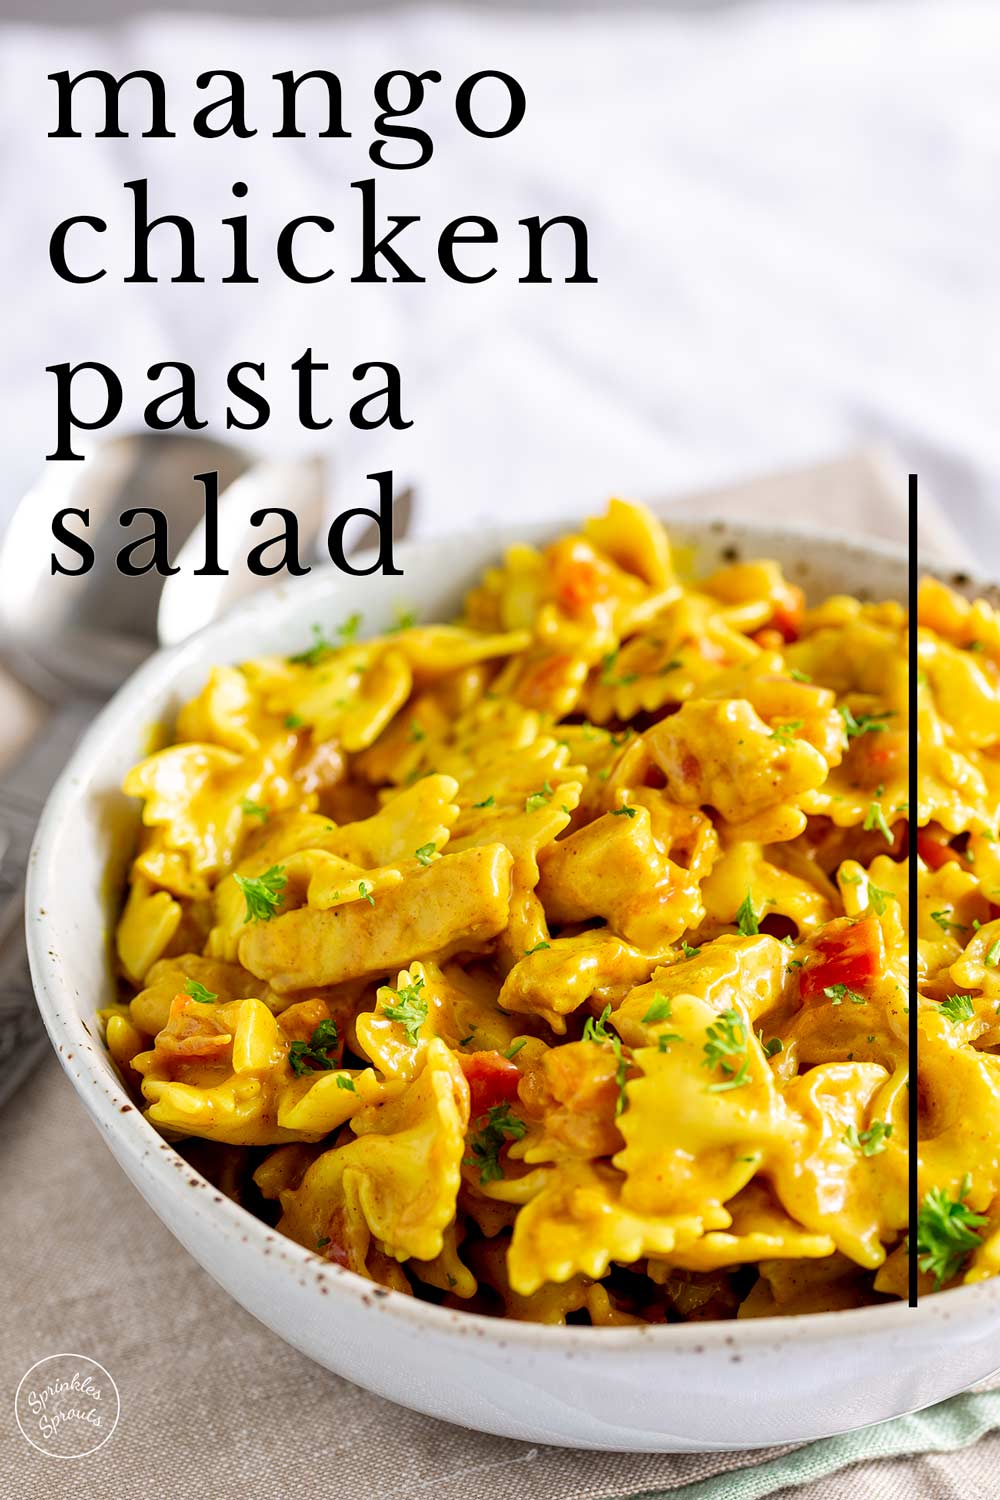 Pin image - Mango chicken pasta salad with text overlay